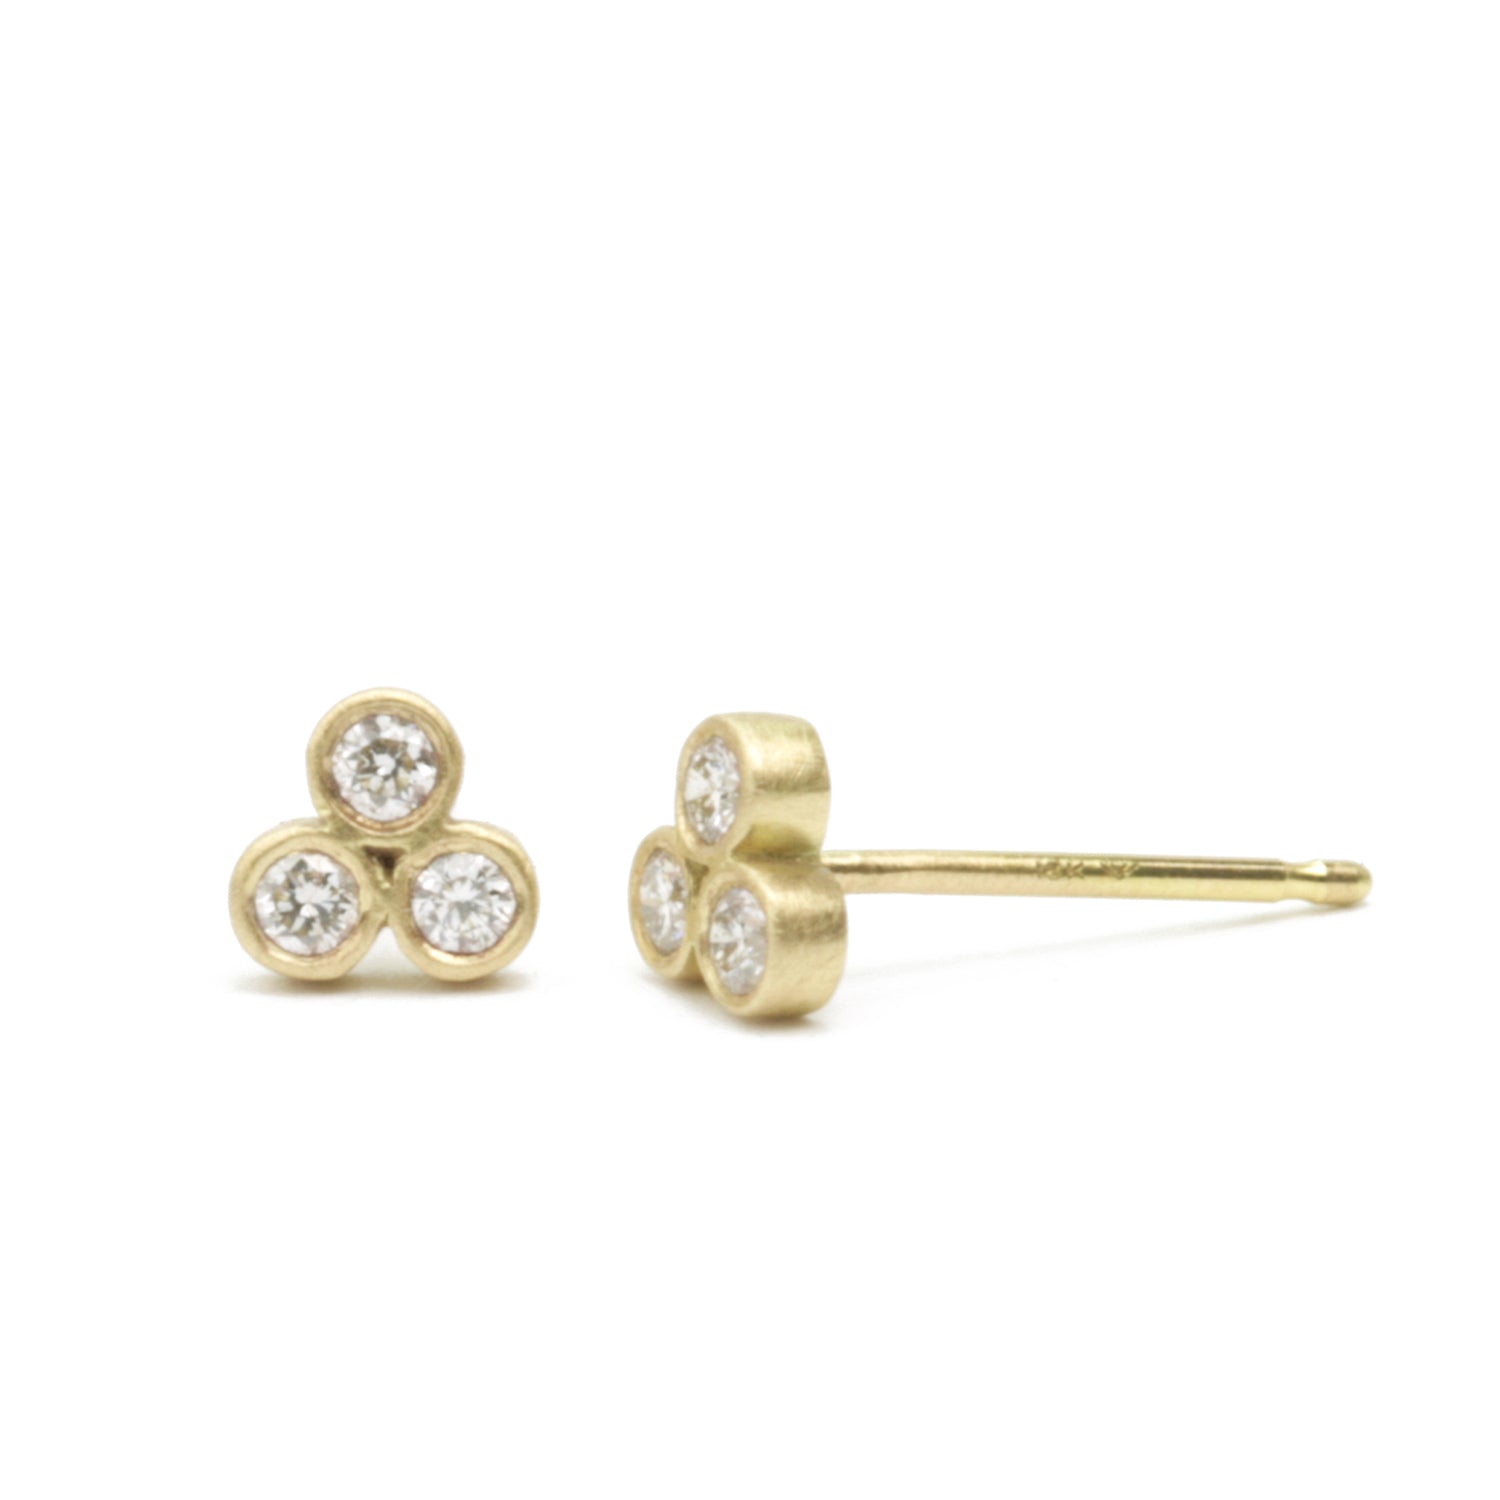 Teeny Triple Stud Earrings with diamonds, front and side views